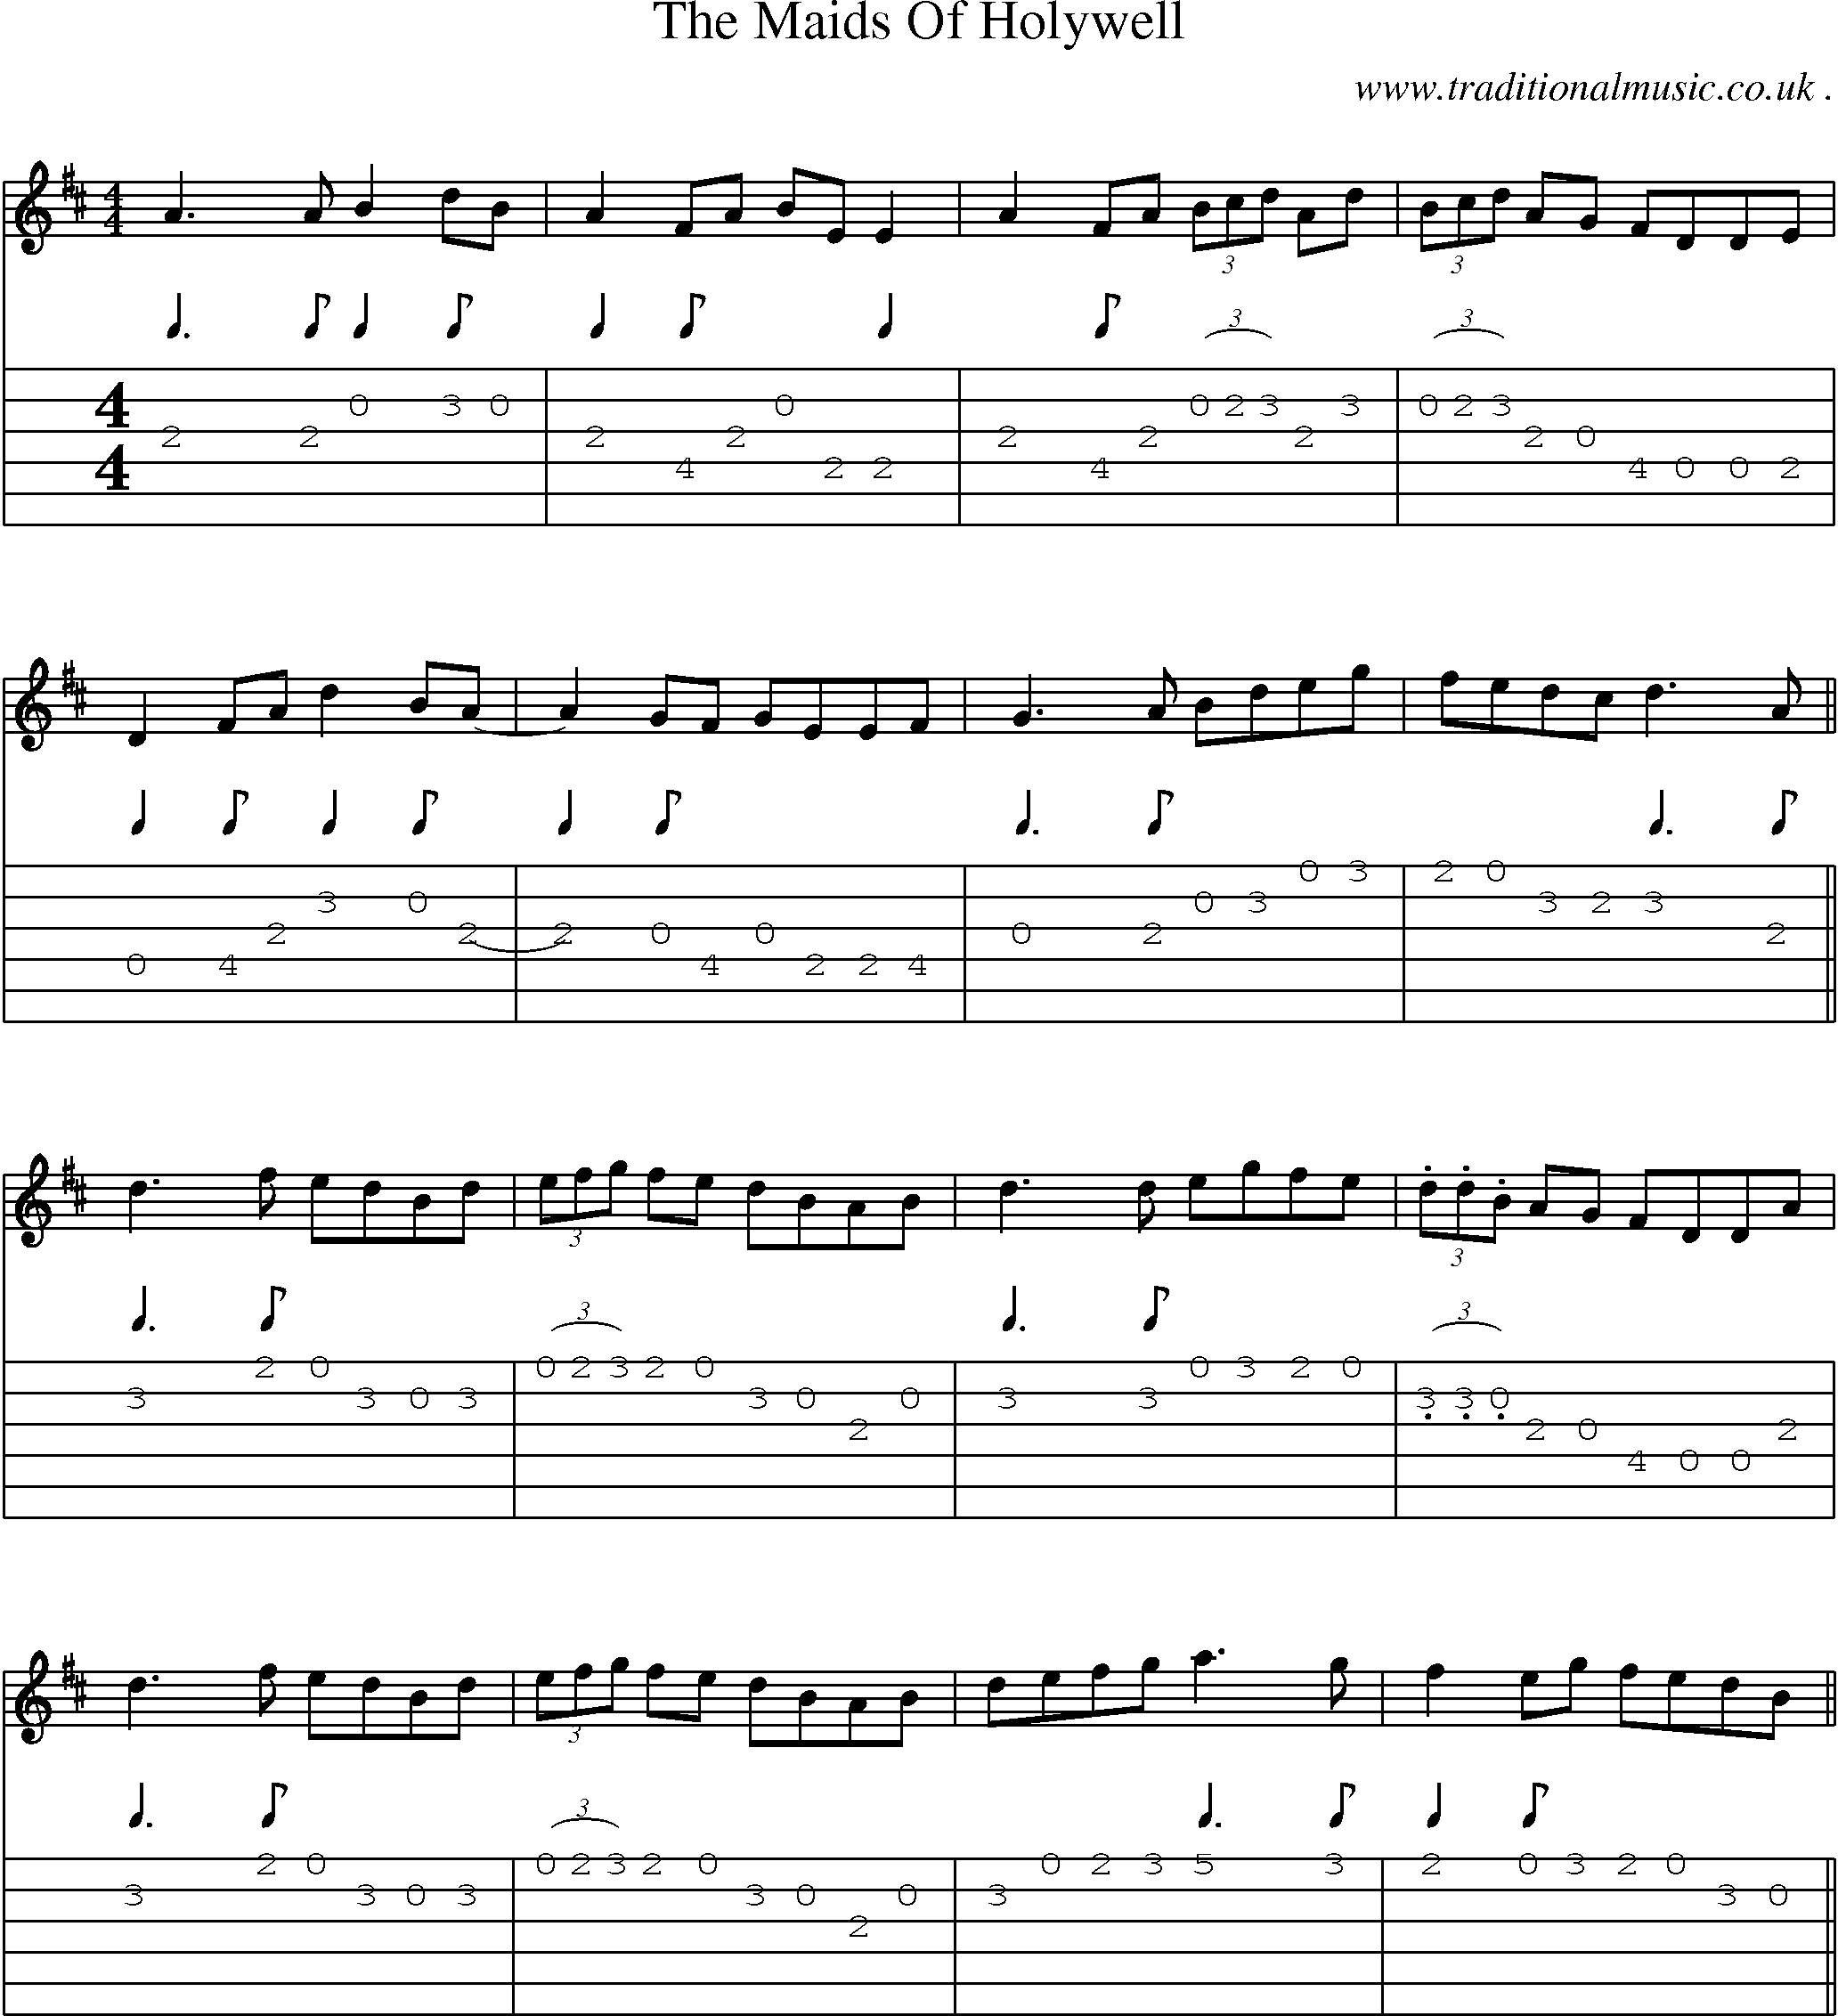 Sheet-Music and Guitar Tabs for The Maids Of Holywell